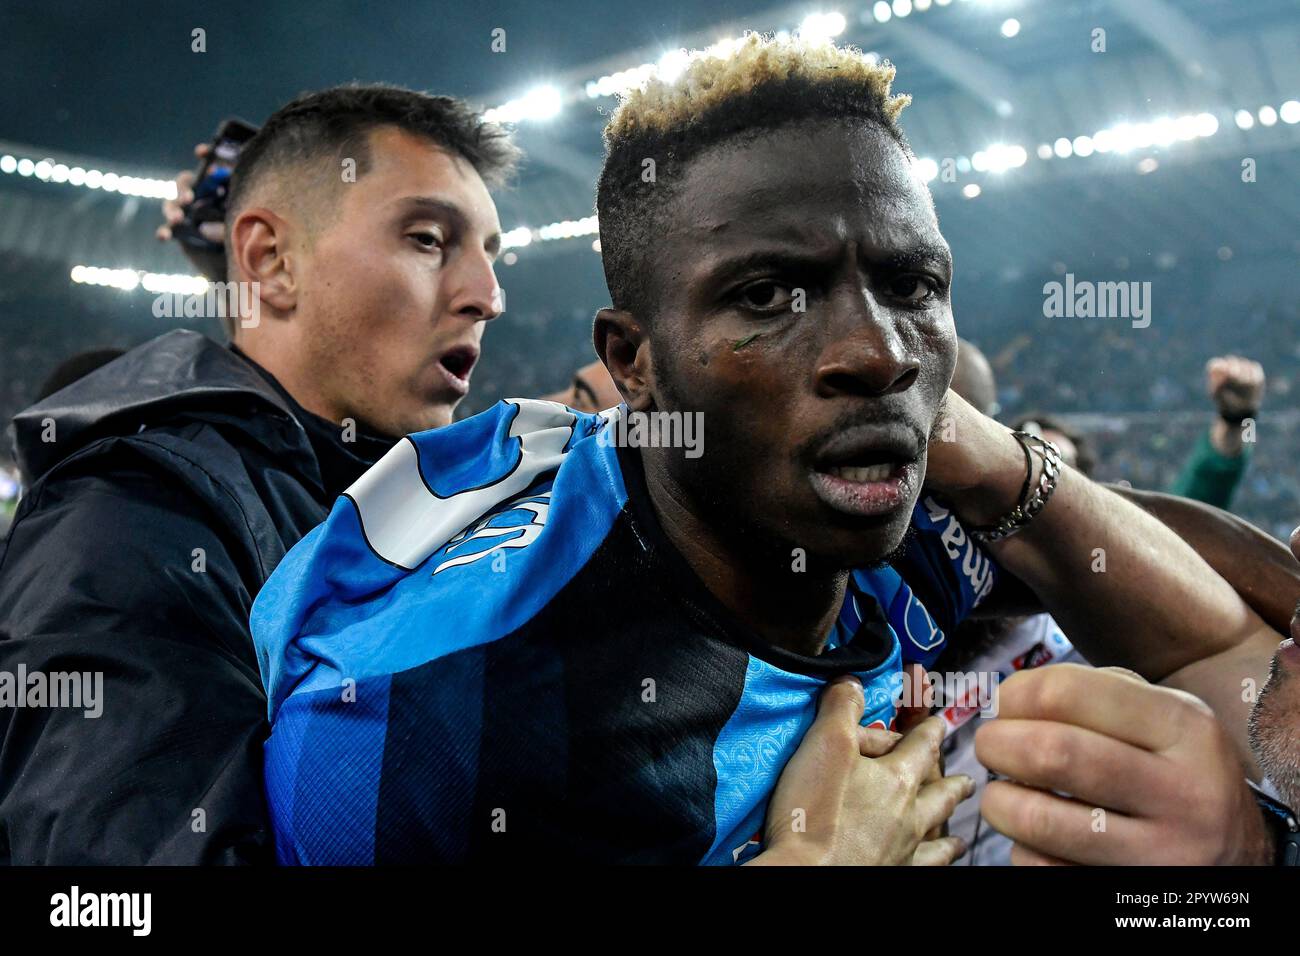 Udine, Italy. 04th May, 2023. Pierluigi Gollini and Victor Osimhen of SSC Napoli celebrate at the end of the Serie A football match between Udinese Calcio and SSC Napoli at Friuli stadium in Udine (Italy), May 4th, 2023. Napoli drew 1-1 with Udinese winning the Italian title 'scudetto'. Credit: Insidefoto di andrea staccioli/Alamy Live News Stock Photo